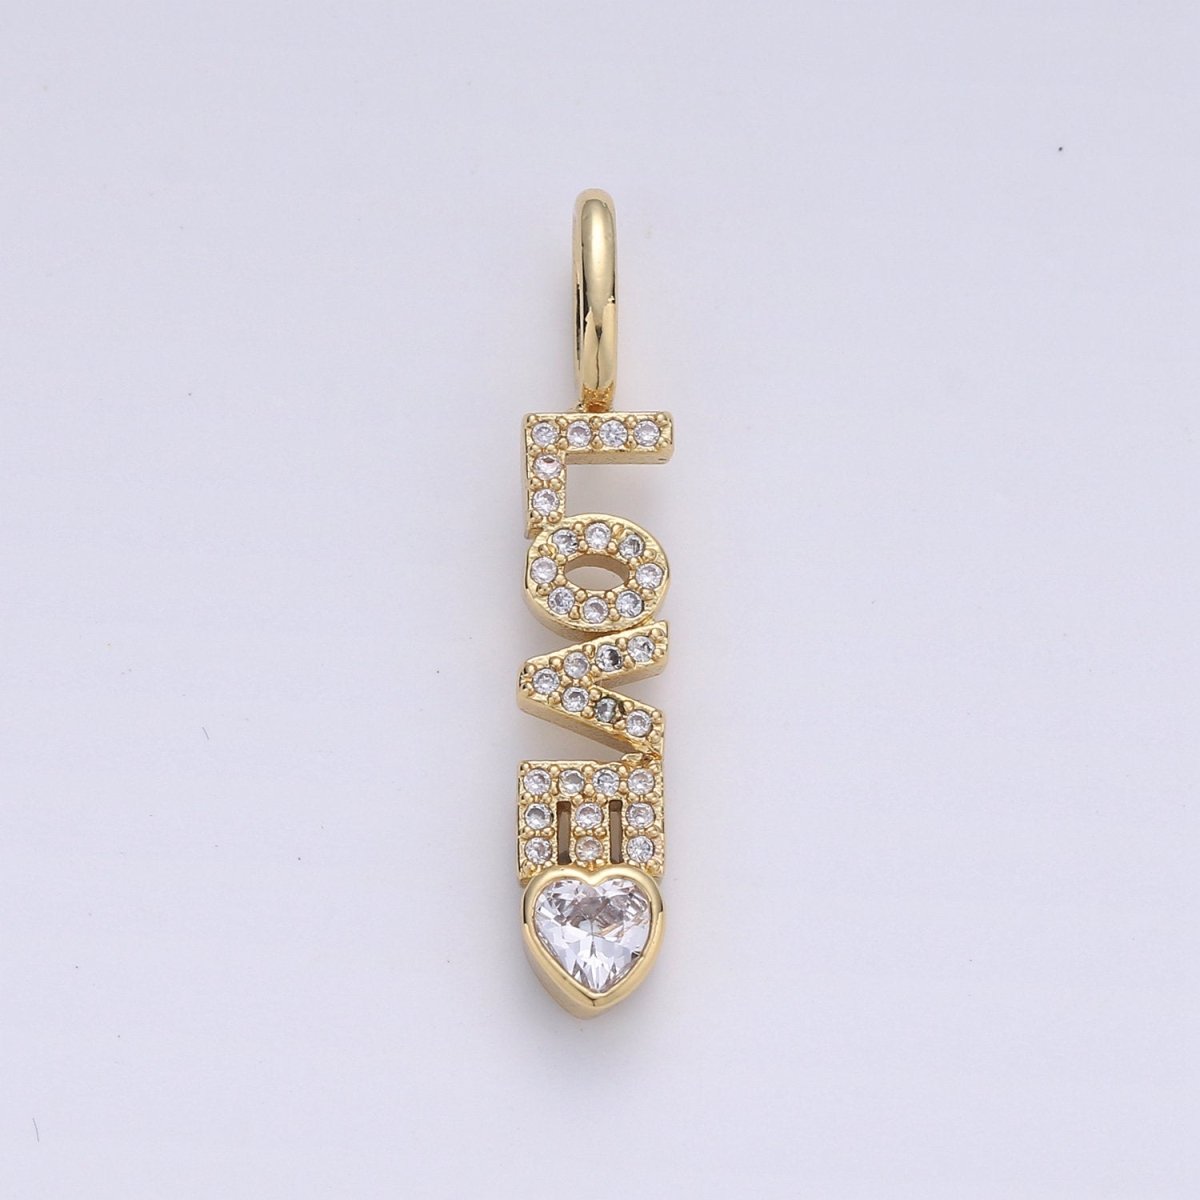 Micro Pave Love Pendant Word Letter Charm for Statement Necklace Charm Pendant in 14k Gold Filled Charm 28x6mm, D-091 - DLUXCA